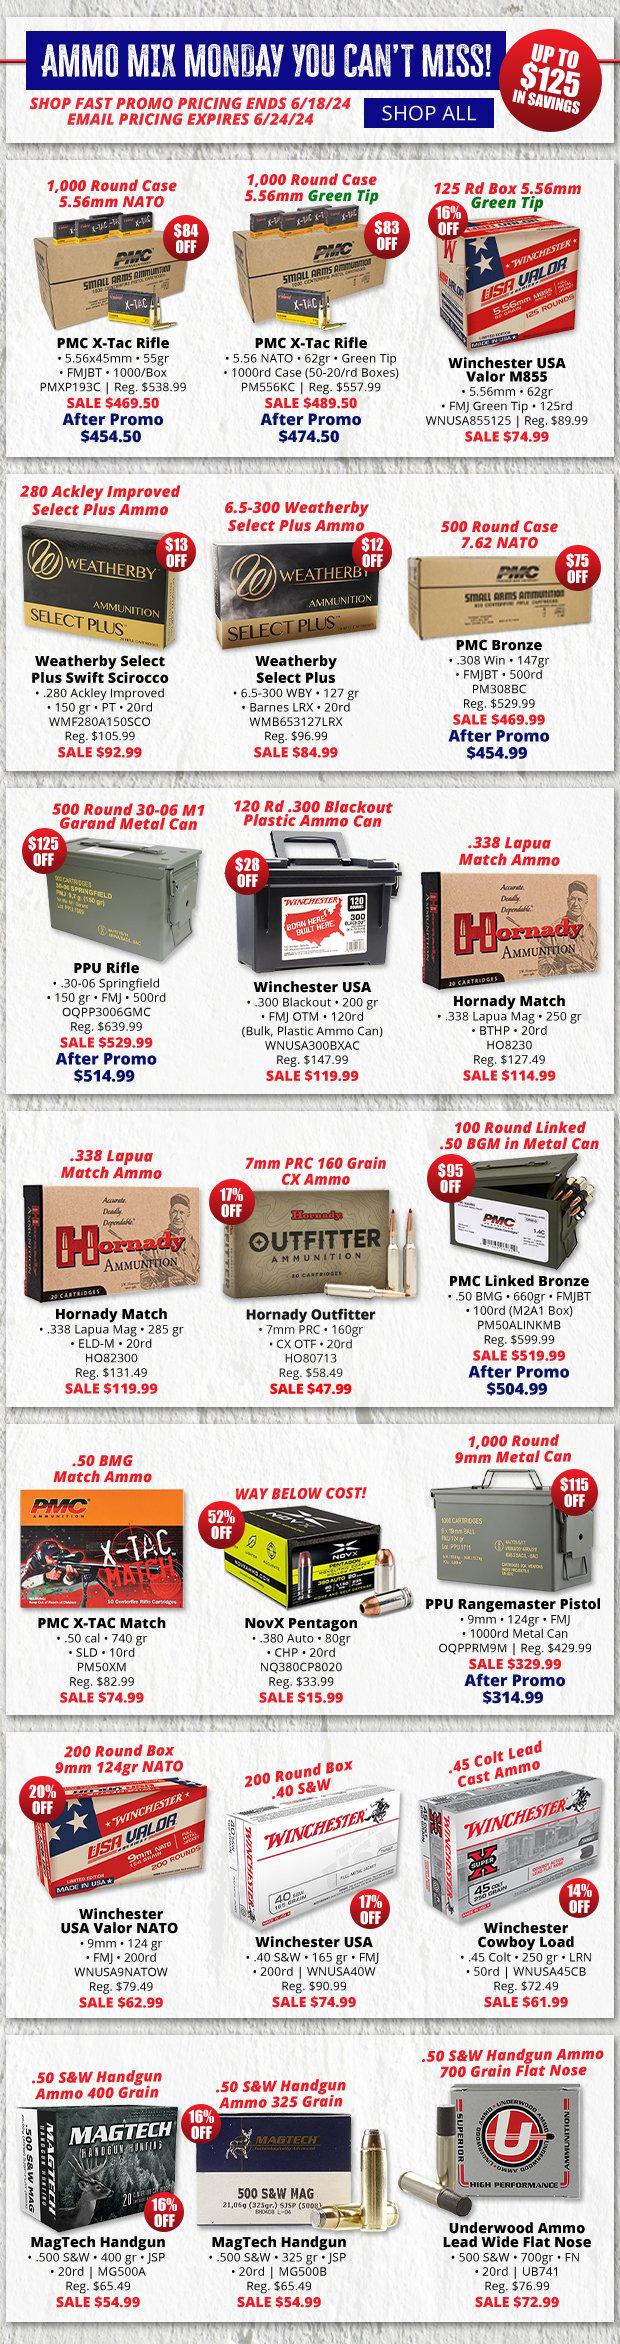 Up to $125 Off on Ammo Mix Monday You Can't Miss